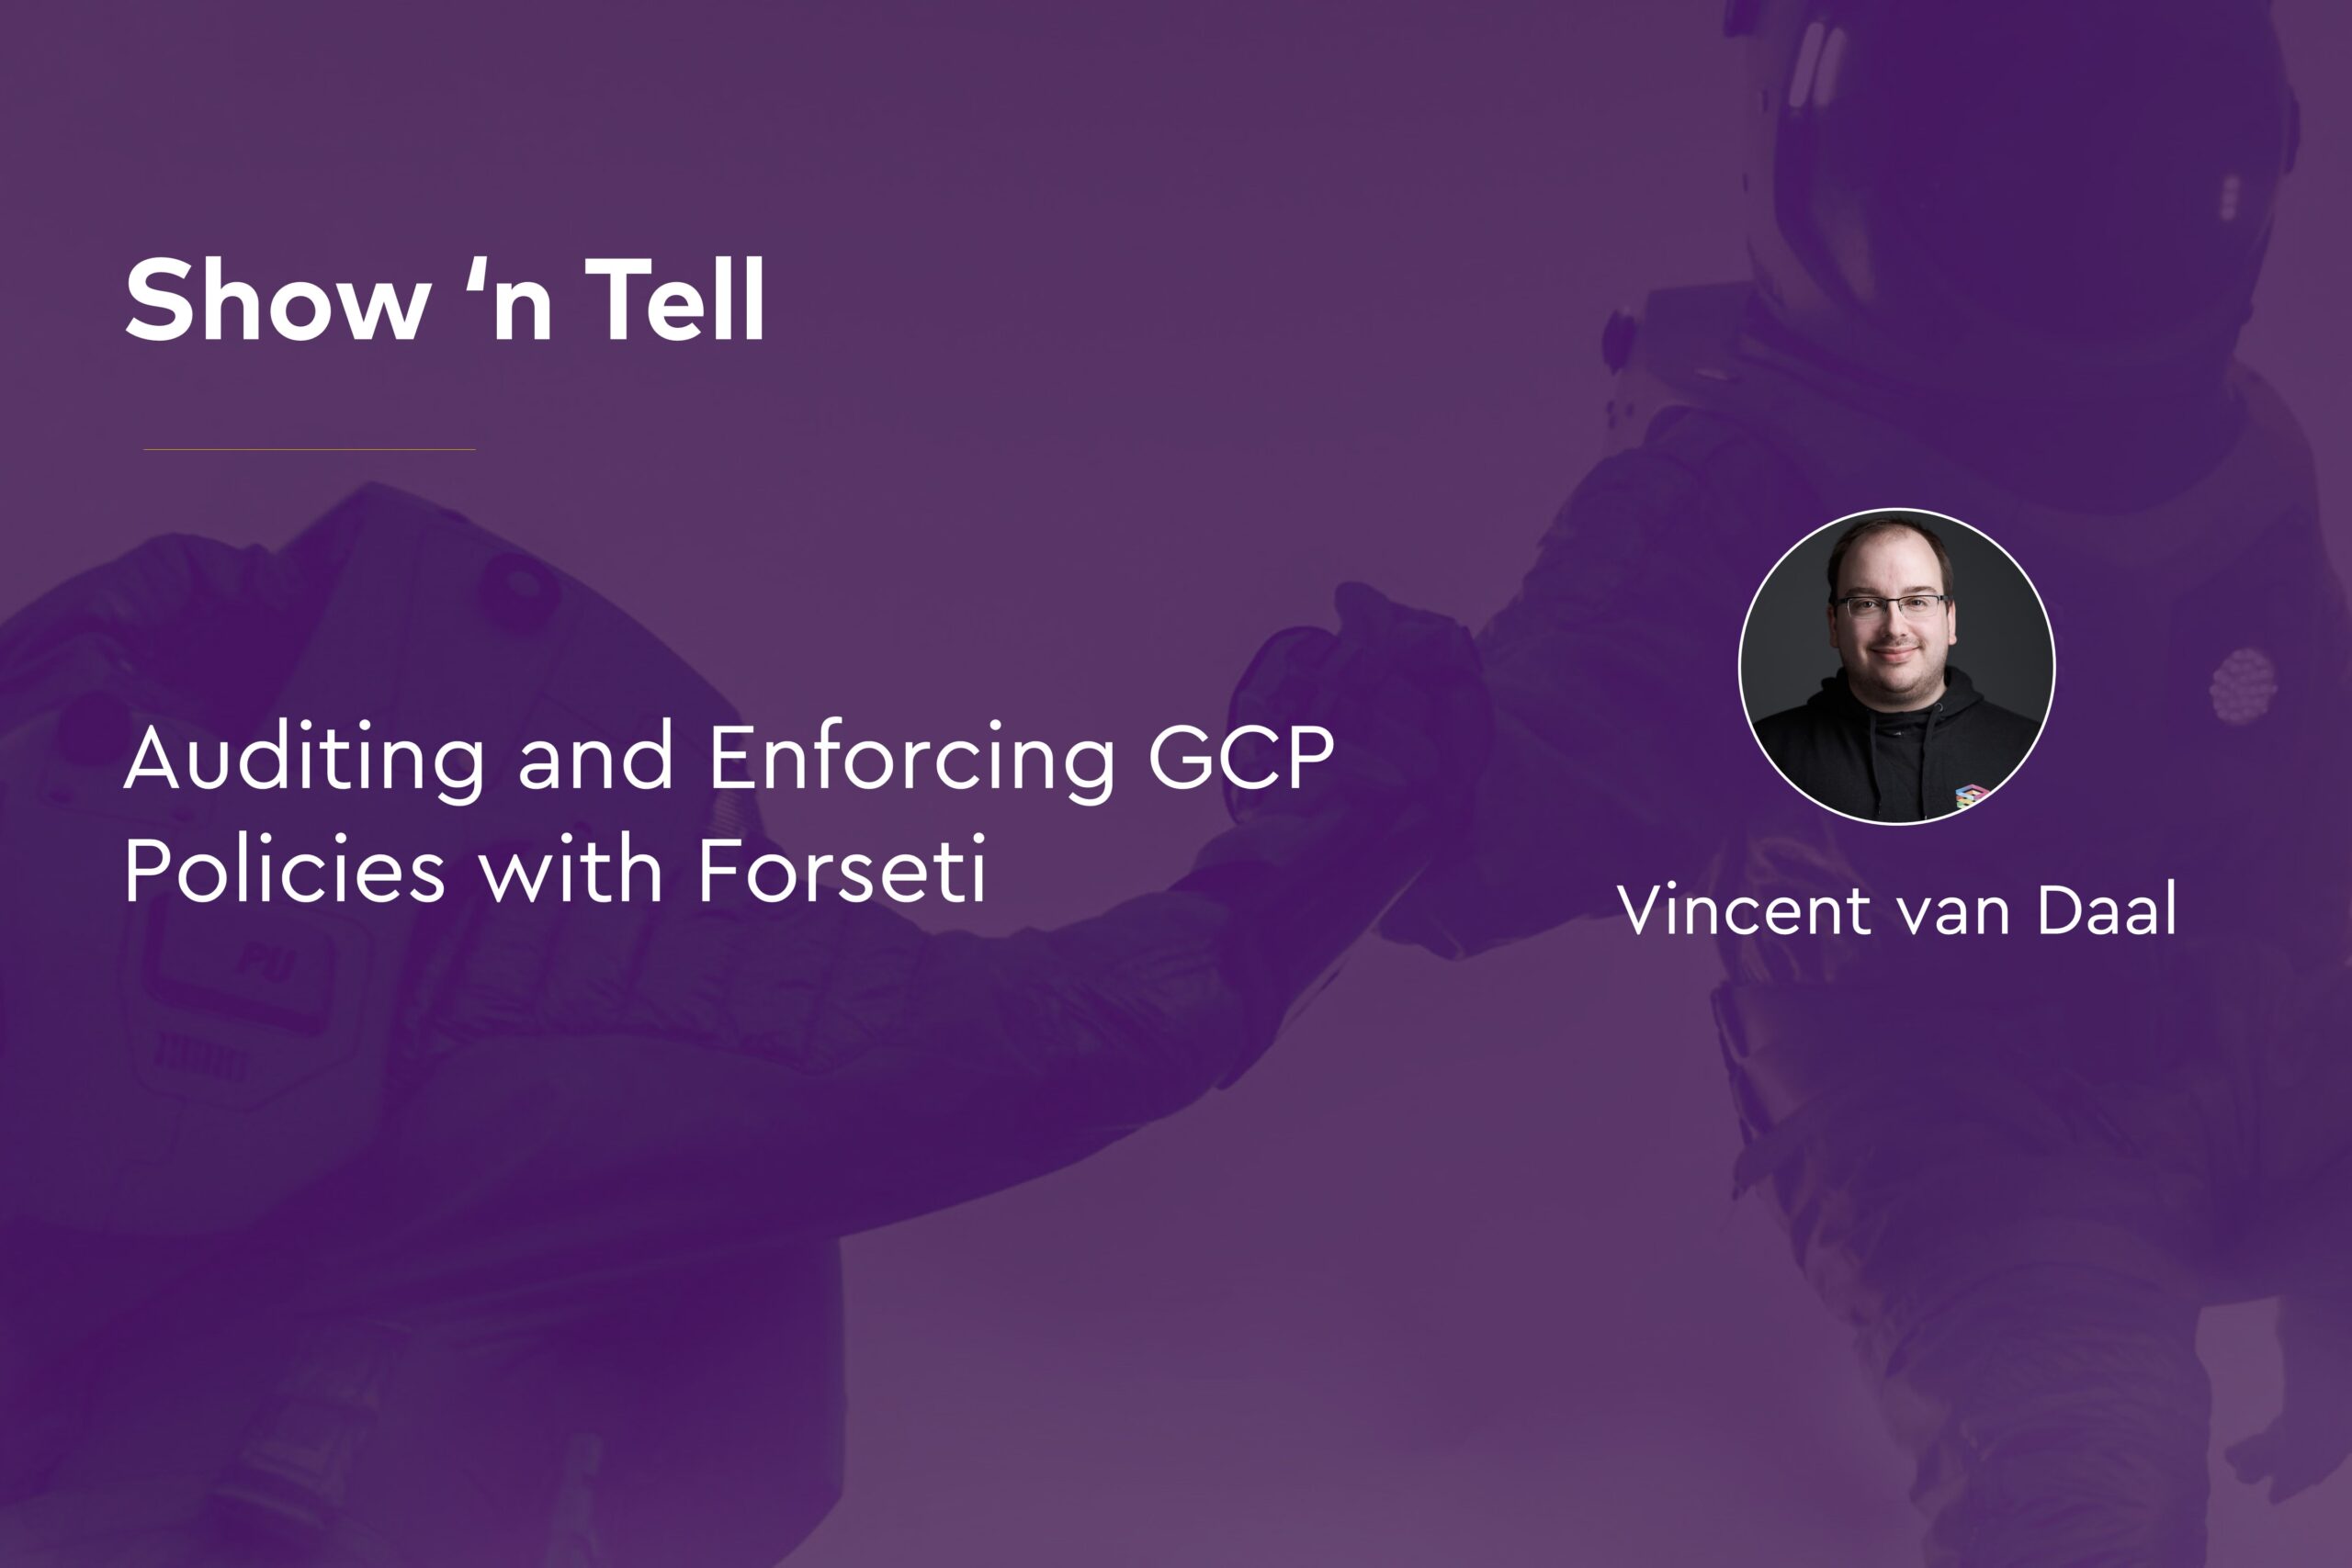 Auditing Enforcing GCP Policies Forseti with Vincent van Daal